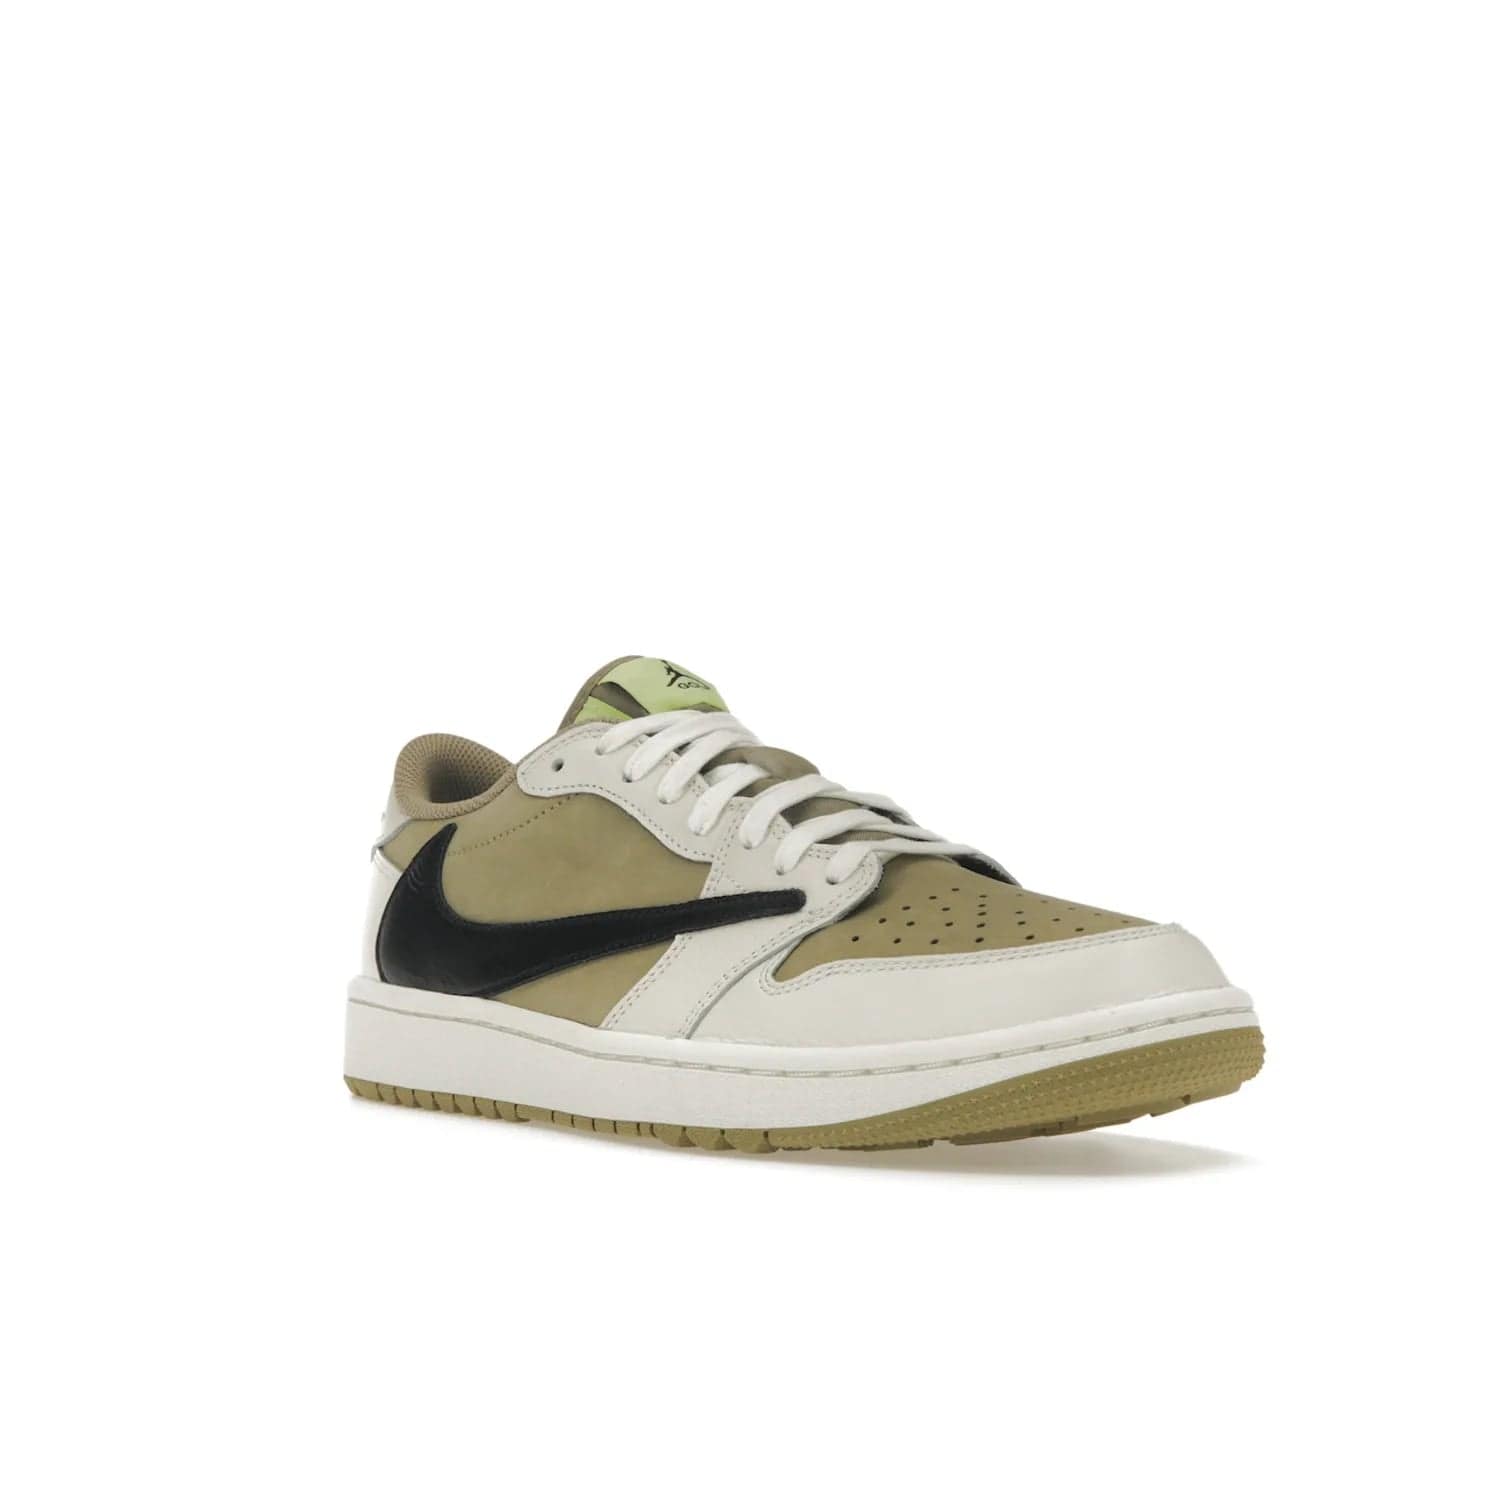 Jordan 1 Retro Low Golf Travis Scott Neutral Olive - Image 6 - Only at www.BallersClubKickz.com - Explore the unique Jordan 1 Retro Low Golf Travis Scott Neutral Olive, an olive-green sneaker collaboration between the iconic Jordan Brand and music royalty, Travis Scott. This special pair is tailored for the golf course with altered traction, hardened rubber, and a sleek style perfect for everyday wear. Get your pair and impress the crowd with its signature earth tones.